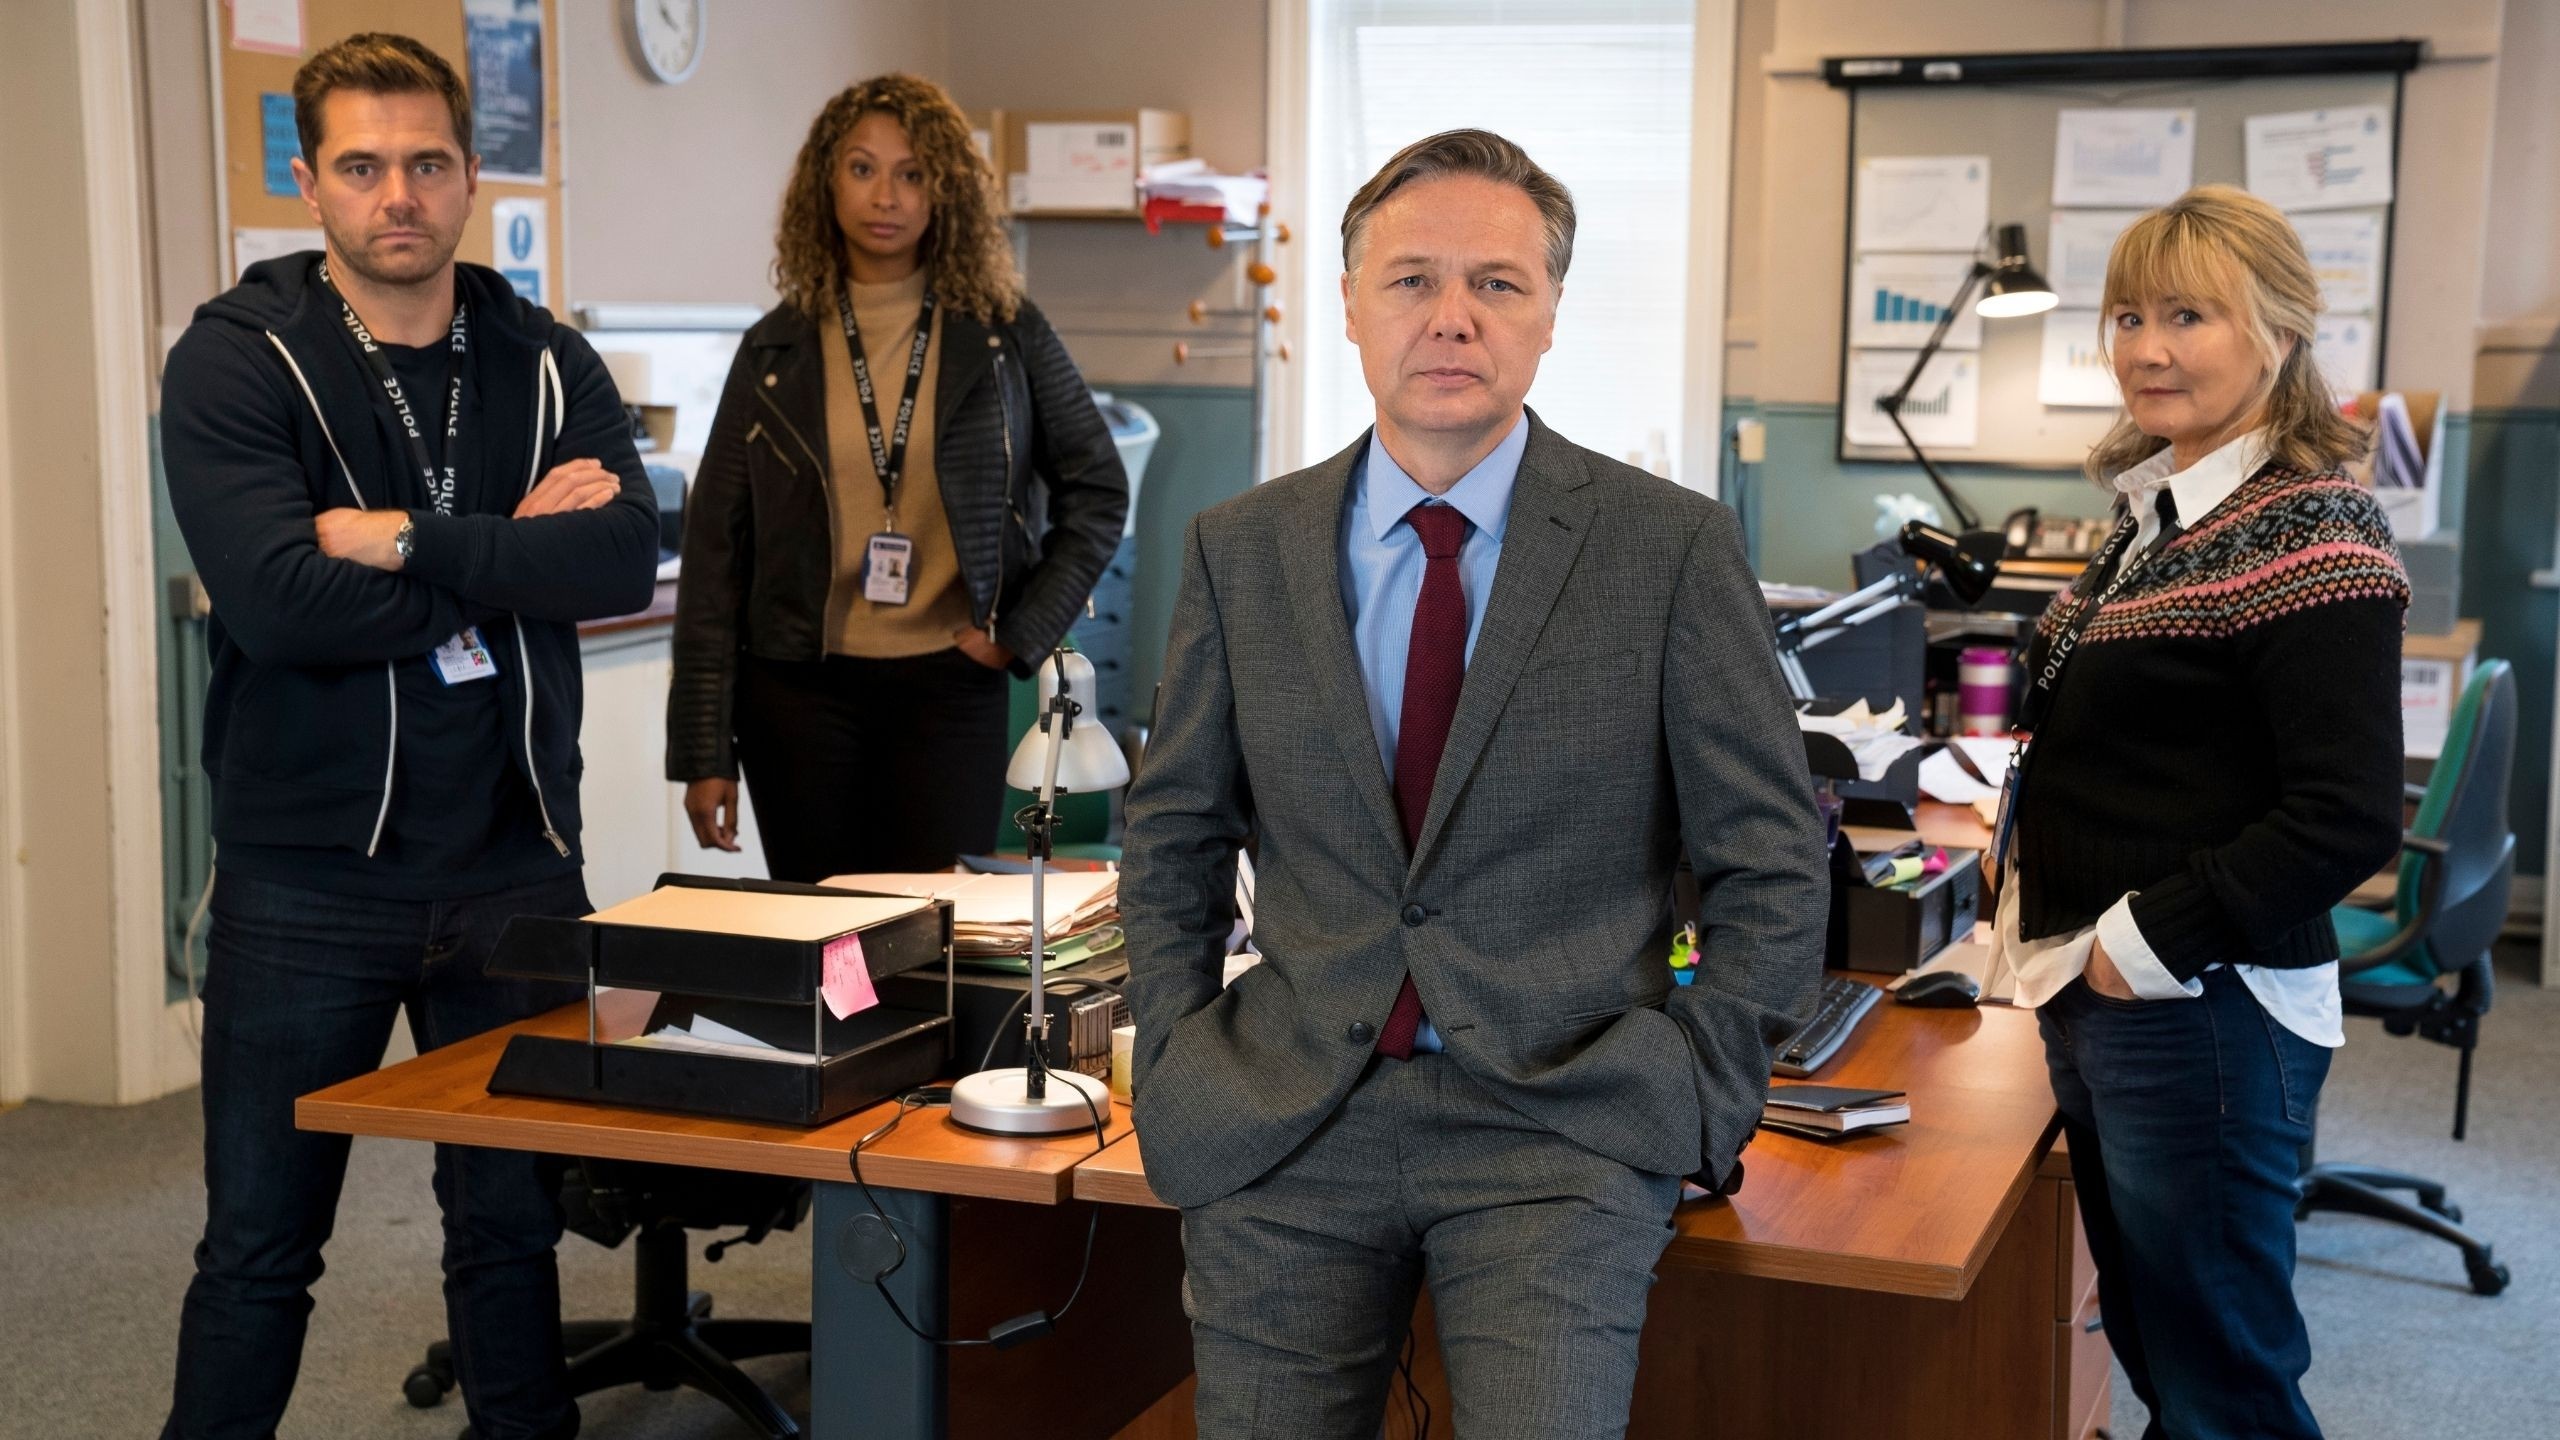 A team of police detectives standing by their desks